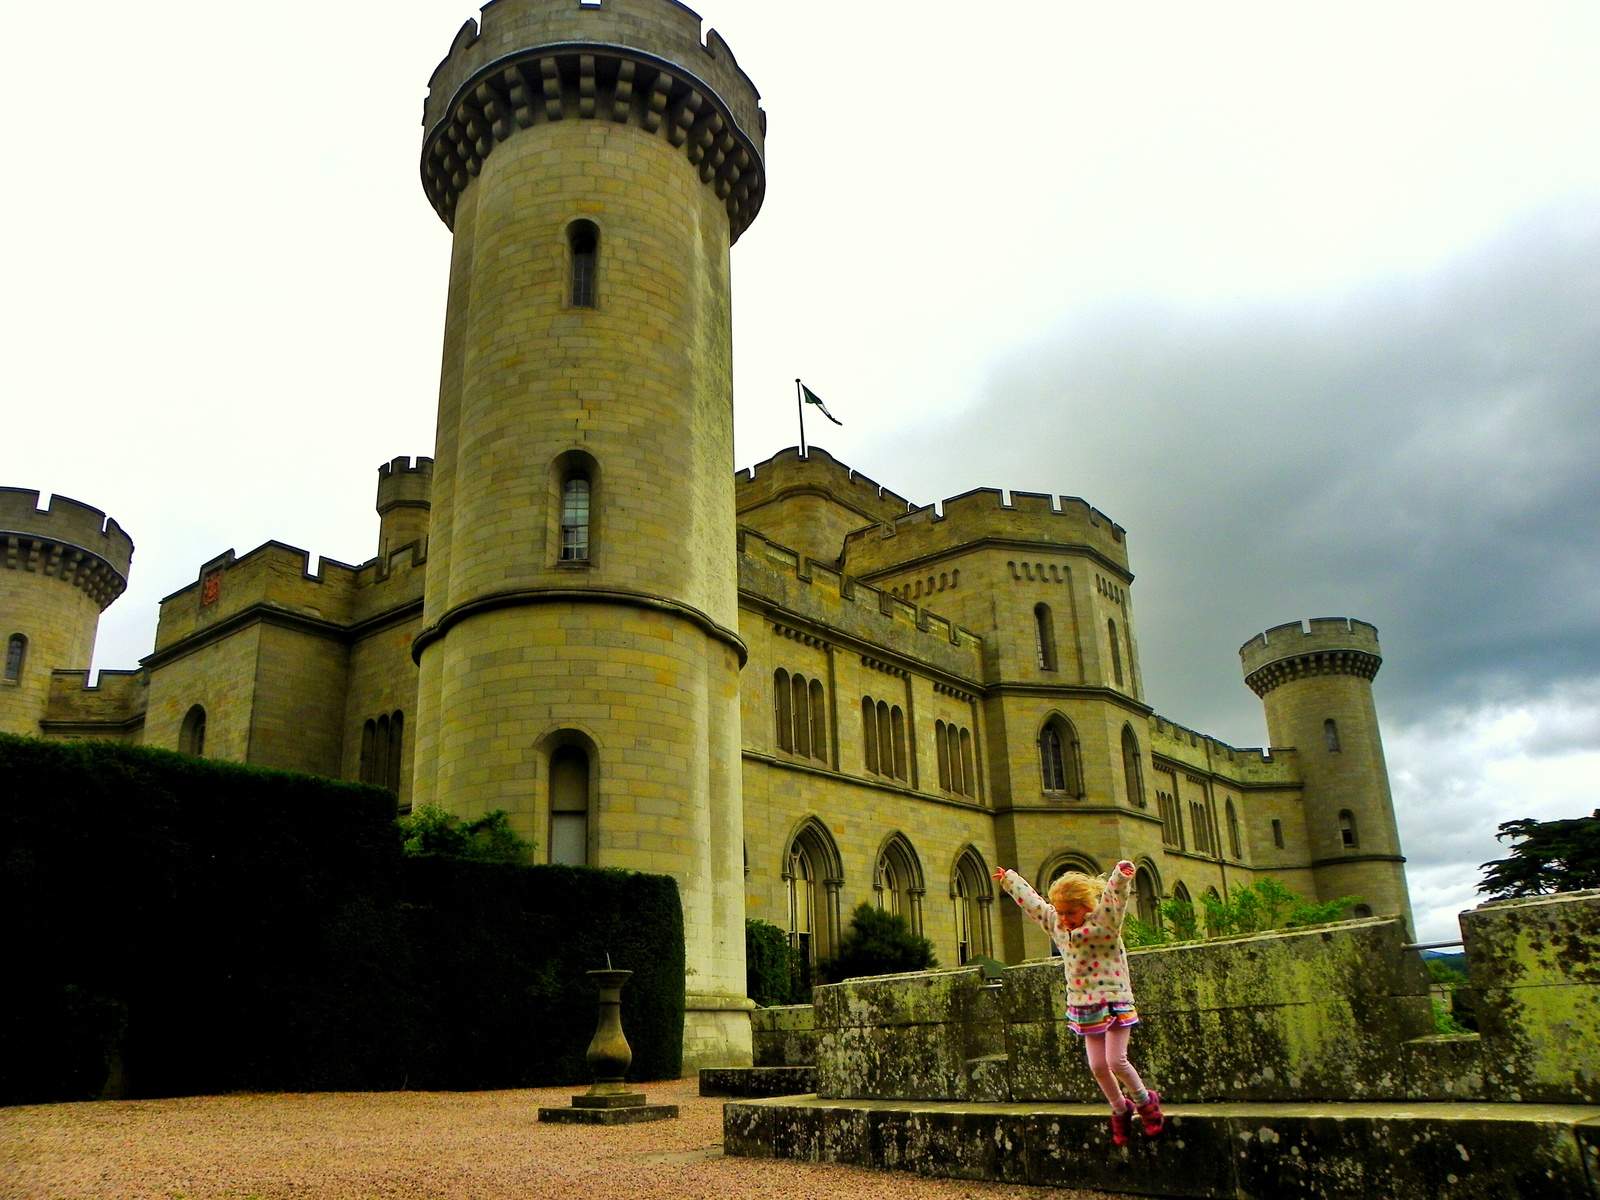 A review of a day out at Eastnor Castle